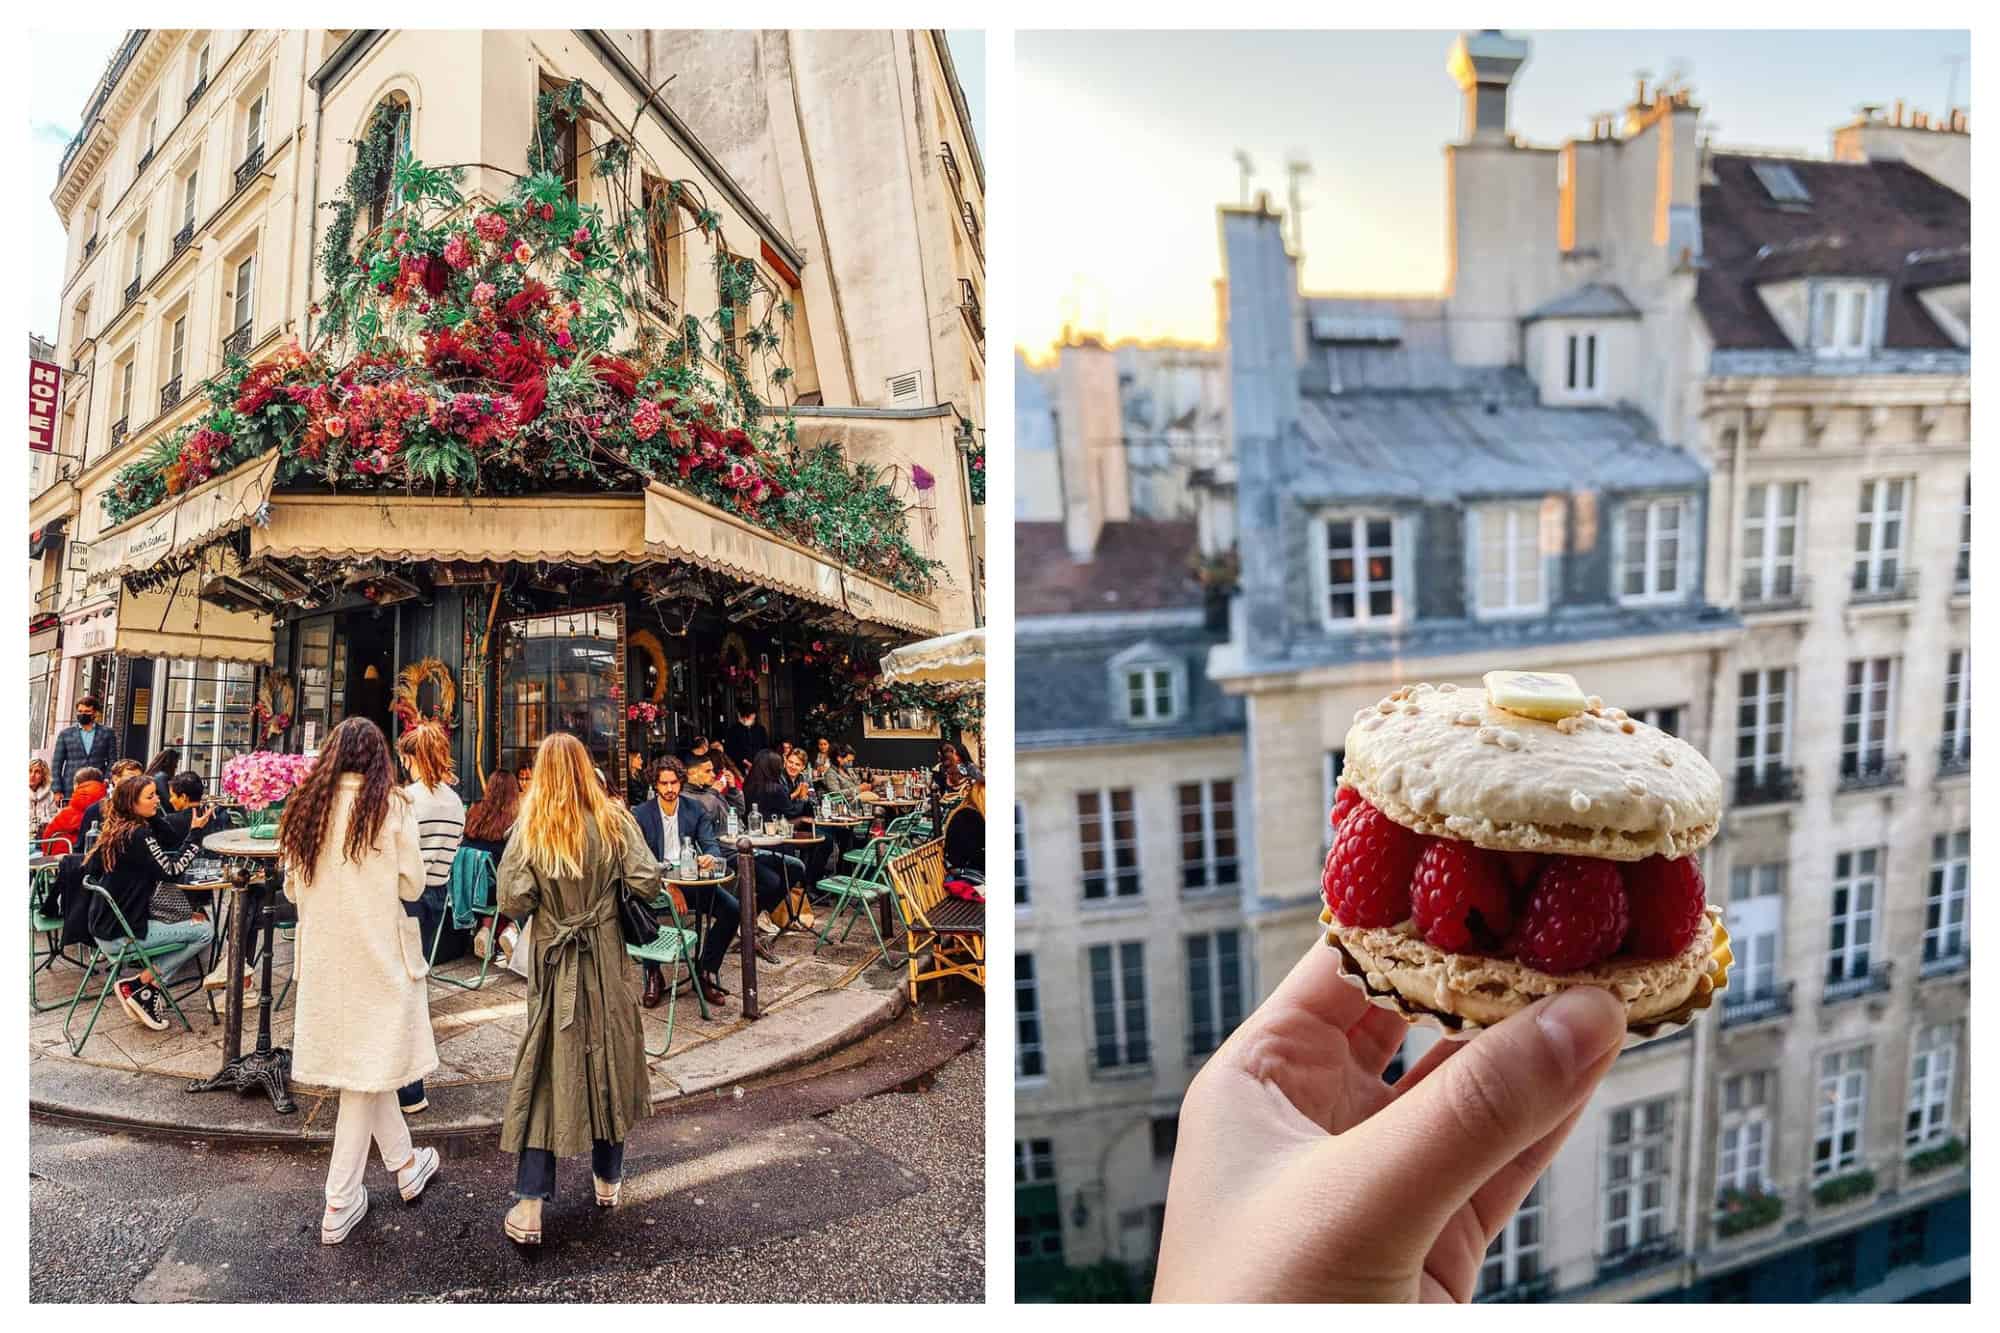 Left: A picture of a Parisian bistrot with customers seated and two ladies approaching from the street. Right: A picture of a French raspberry tart with backgrounds of Parisian buildings and sunset.